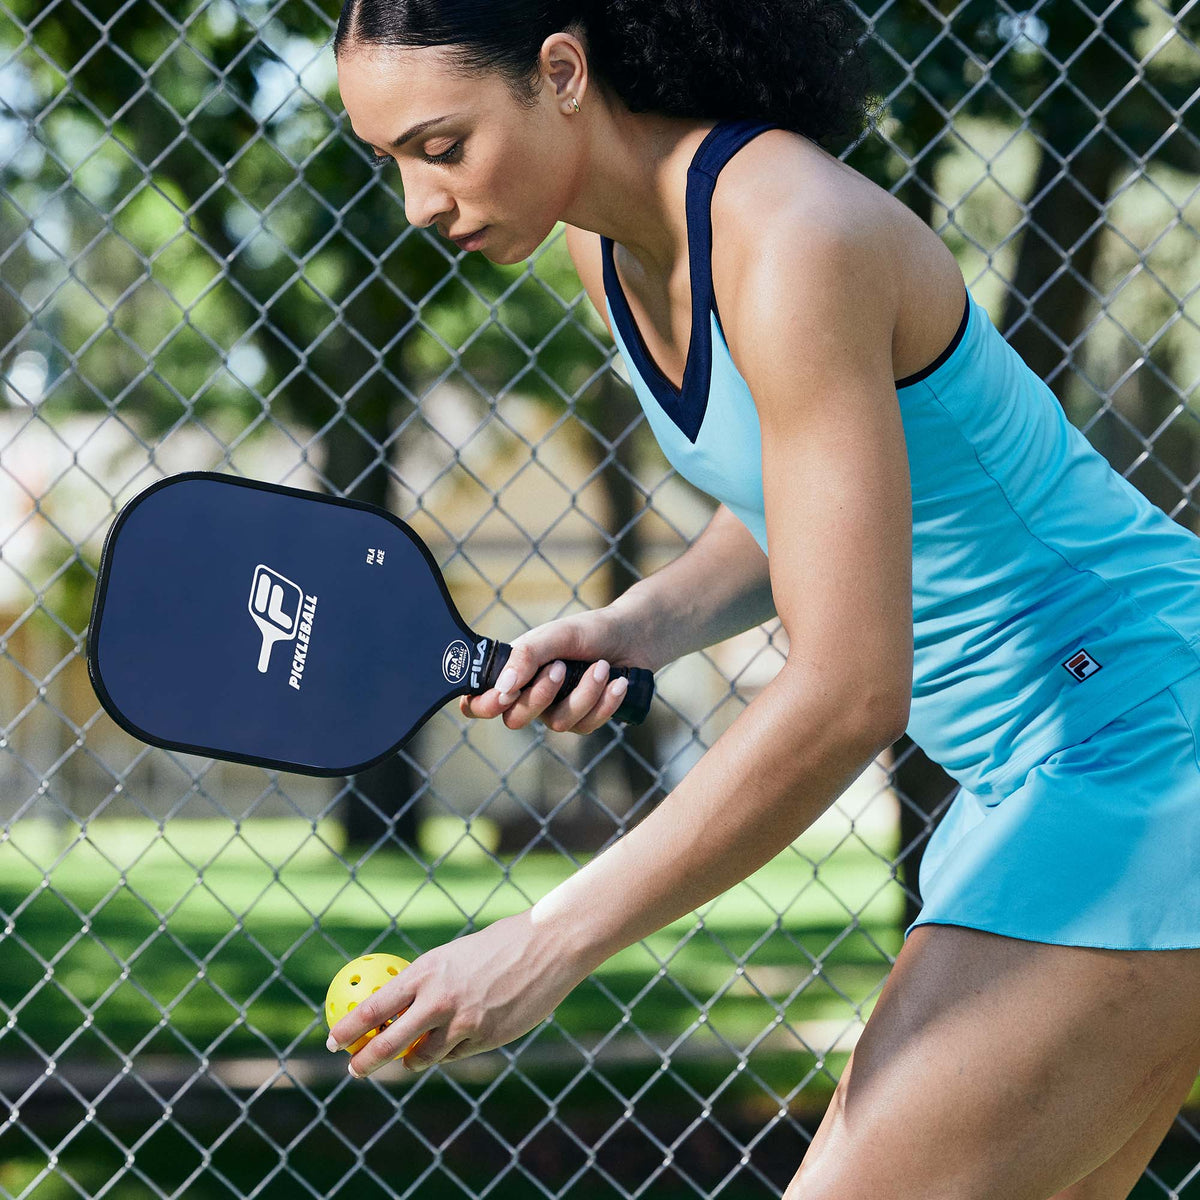 Person outside holding Graphite Pickleball Paddle getting ready to serve the ball over the net